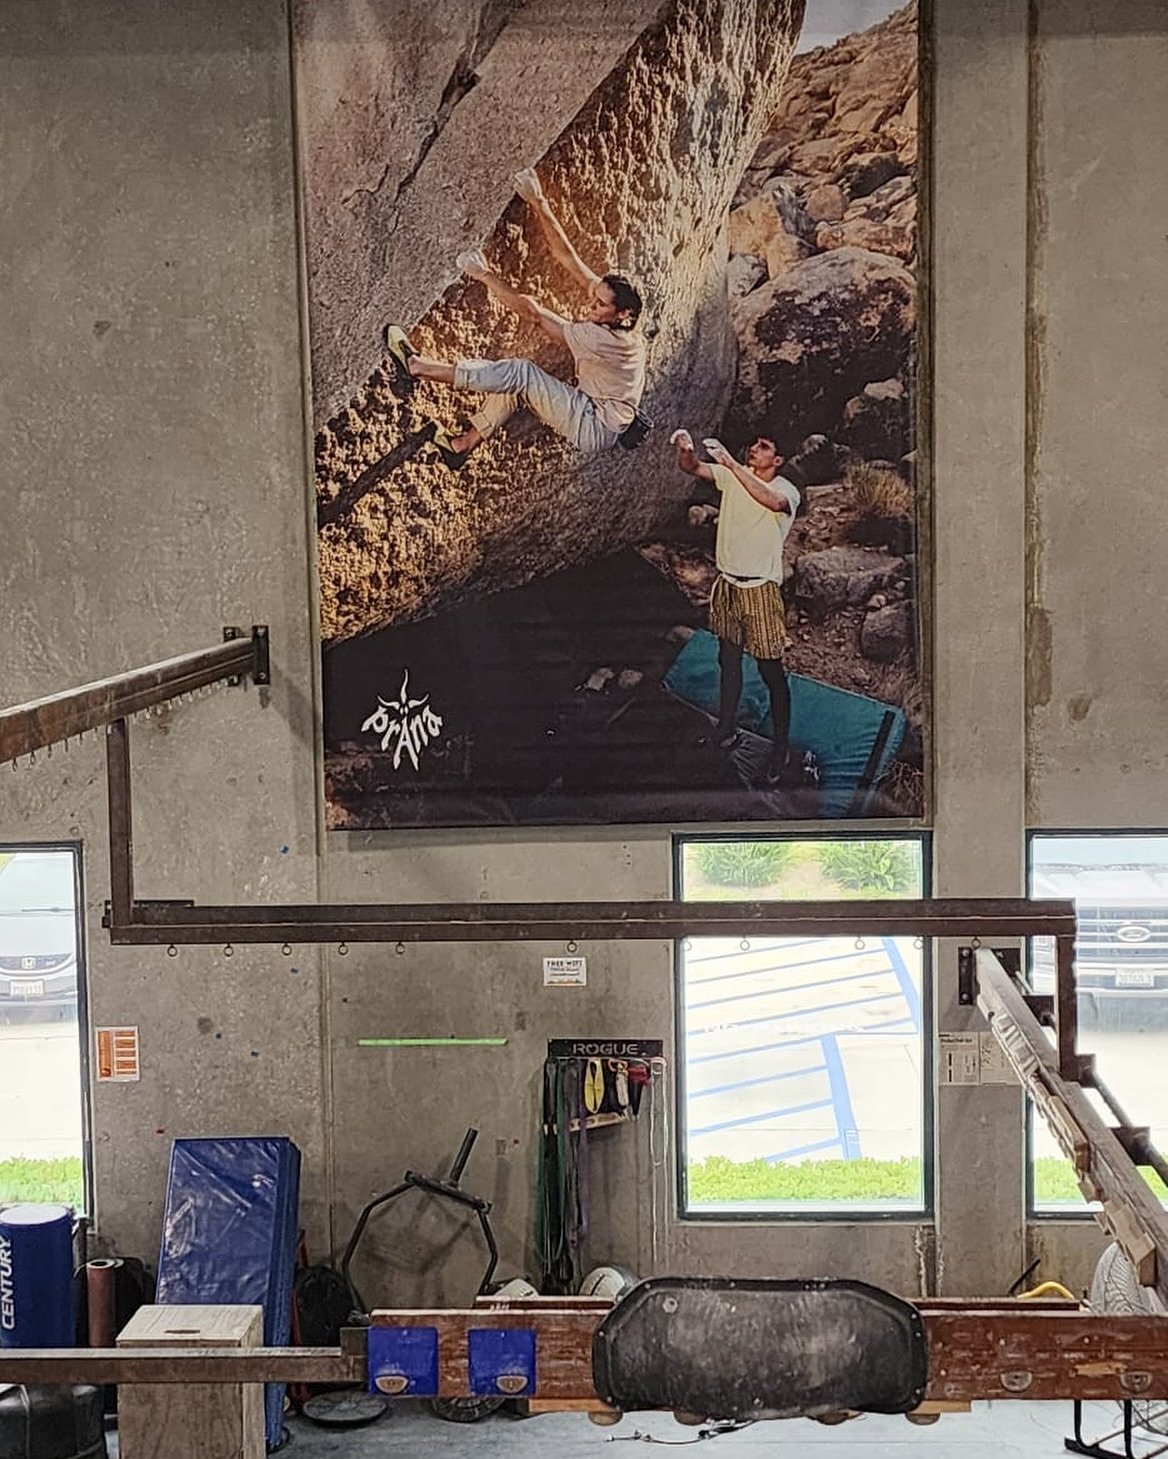 We are so excited to feature our rad new PrAna banner in the gym. Our friend Marco also coming in clutch showing proper spotting technique when climbing. It&rsquo;s cool to be safe and have your friend&rsquo;s back&hellip; literally. Check it out nex